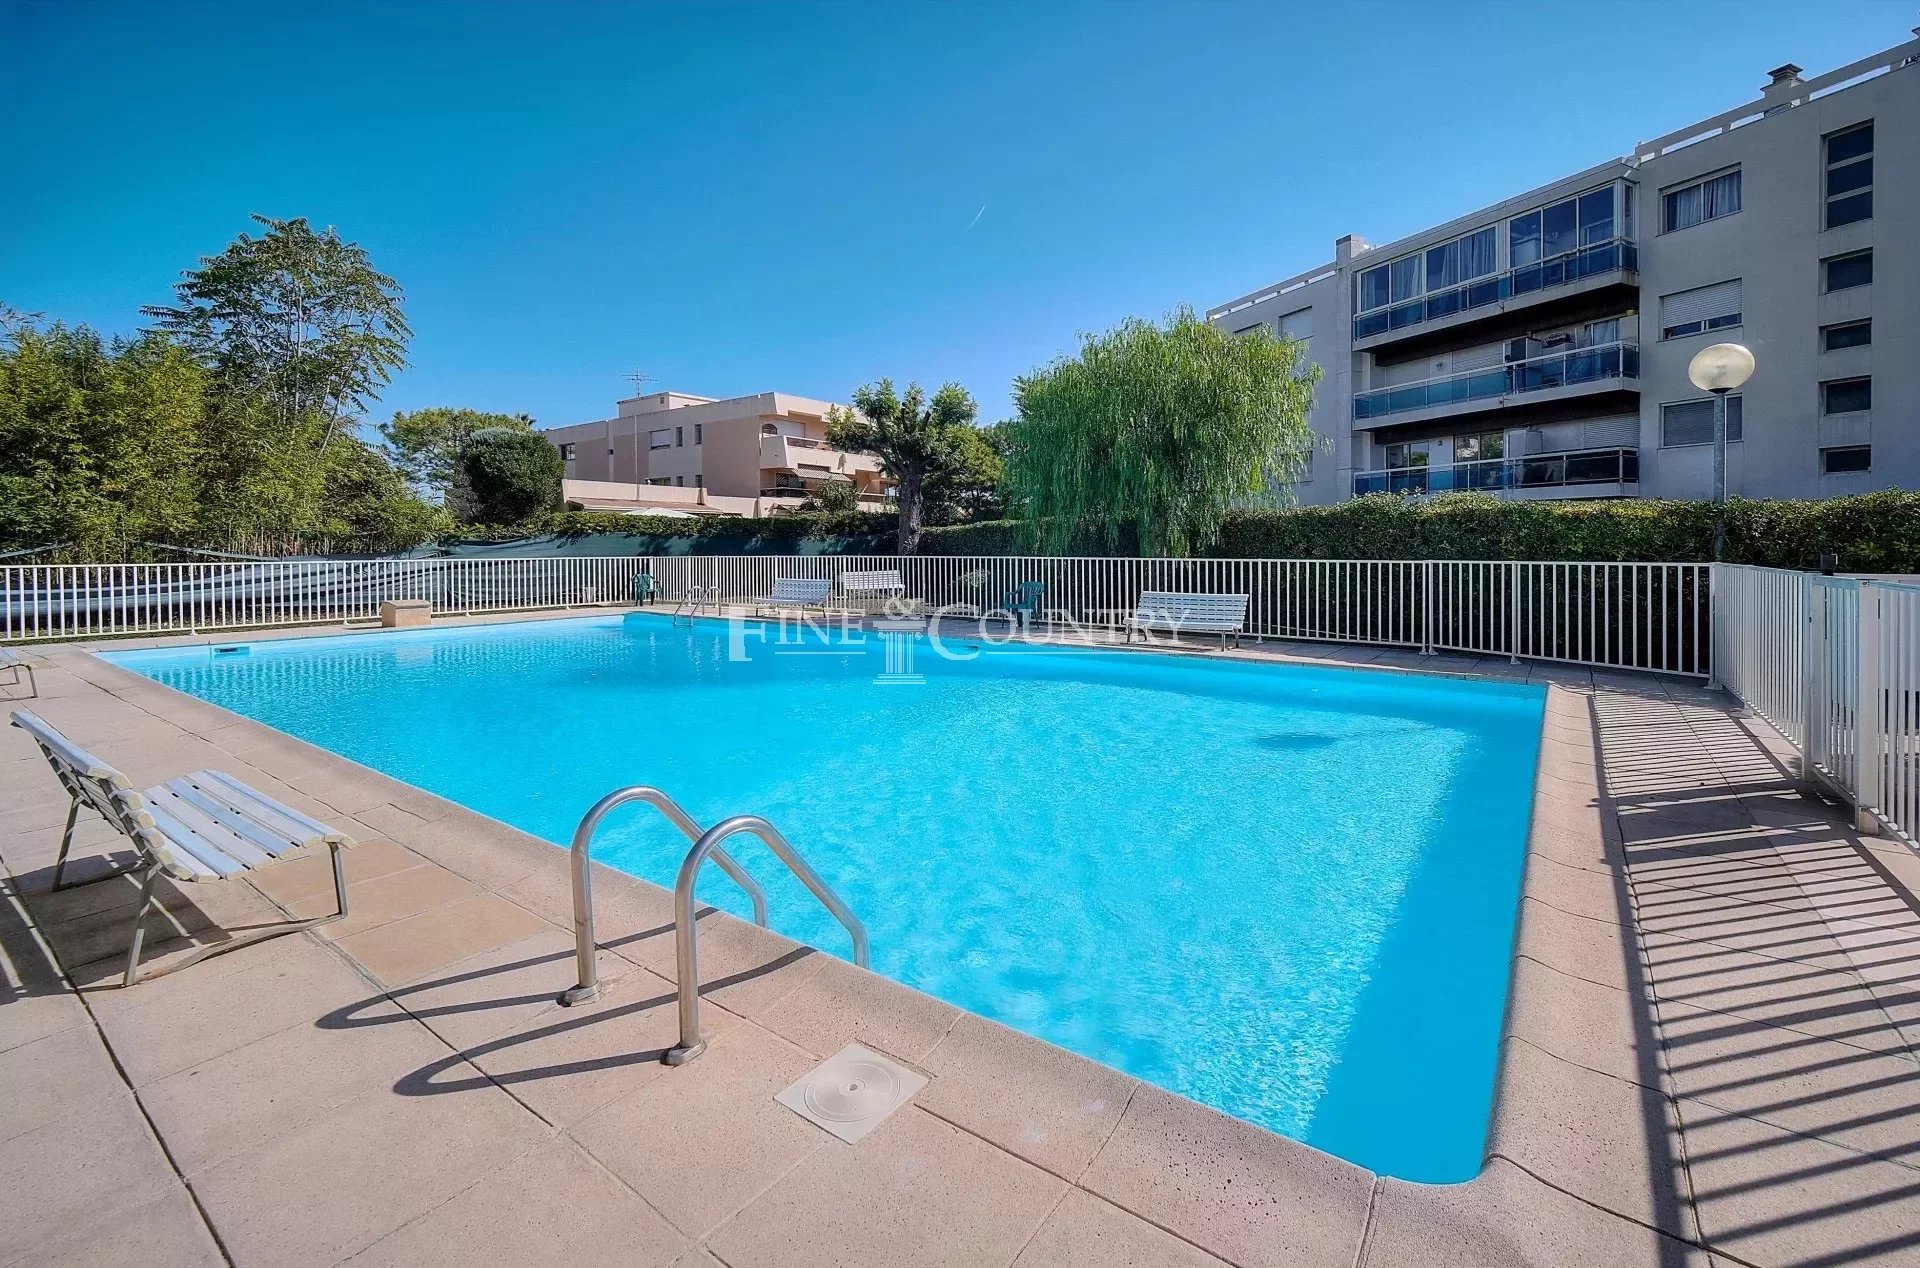 Apartment for sale in Cagnes-sur-mer, beach